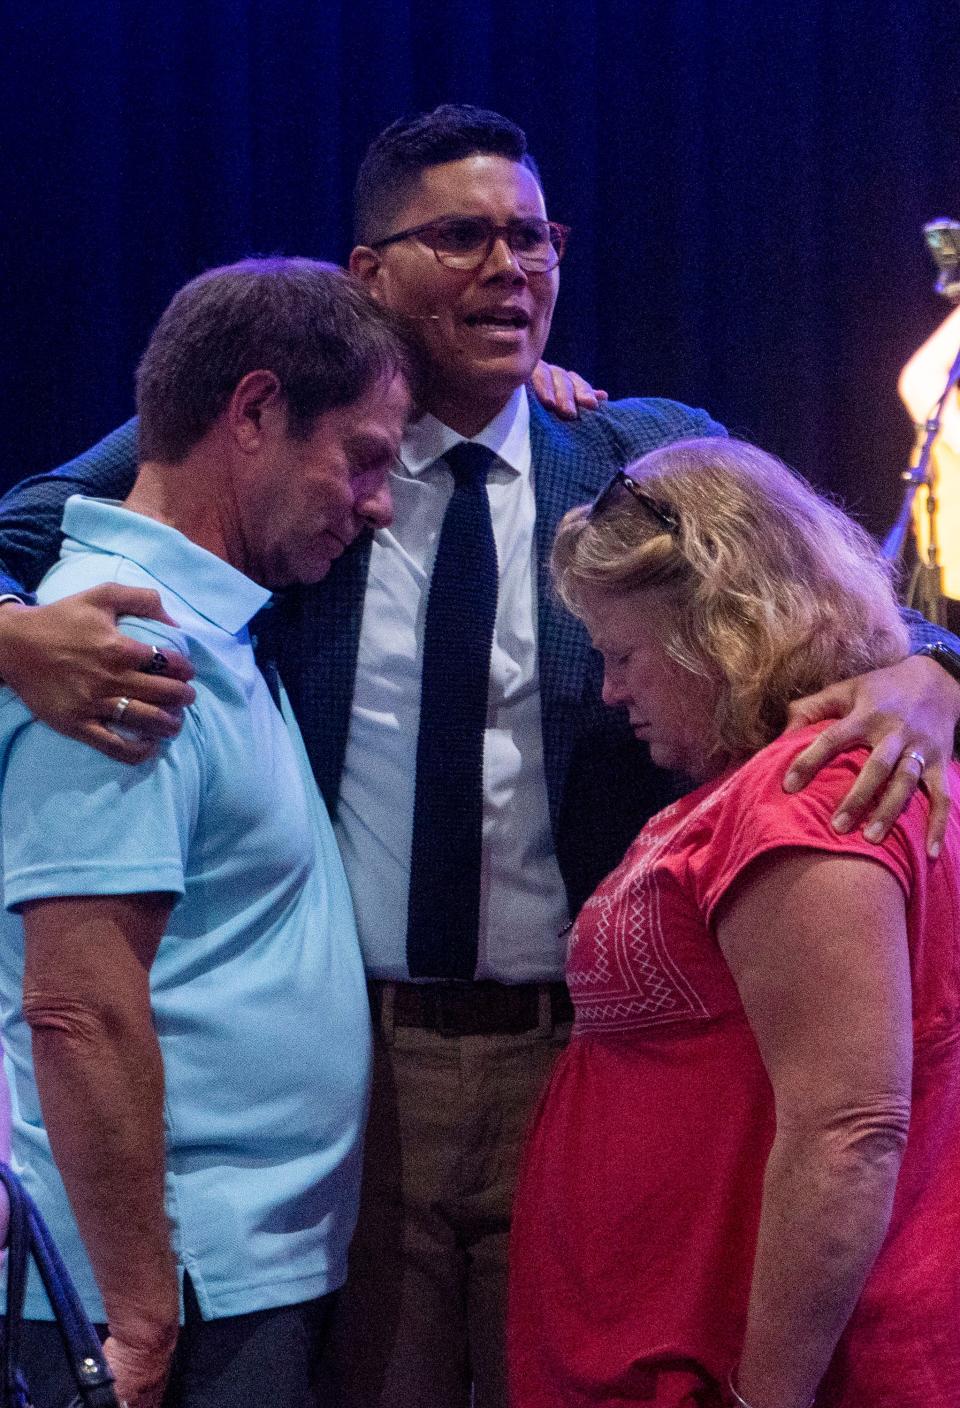 Pastor Geroge Matthew Clash, in center, praying with Brian Seley, Katie Seley's father, on left, and Donna Altman, on right, after the prayer vigil for the victims of the recent flooding in Upper Makefield at the Washington Crossing United Methodist Church in Washington Crossing on Thursday, July 20, 2023.